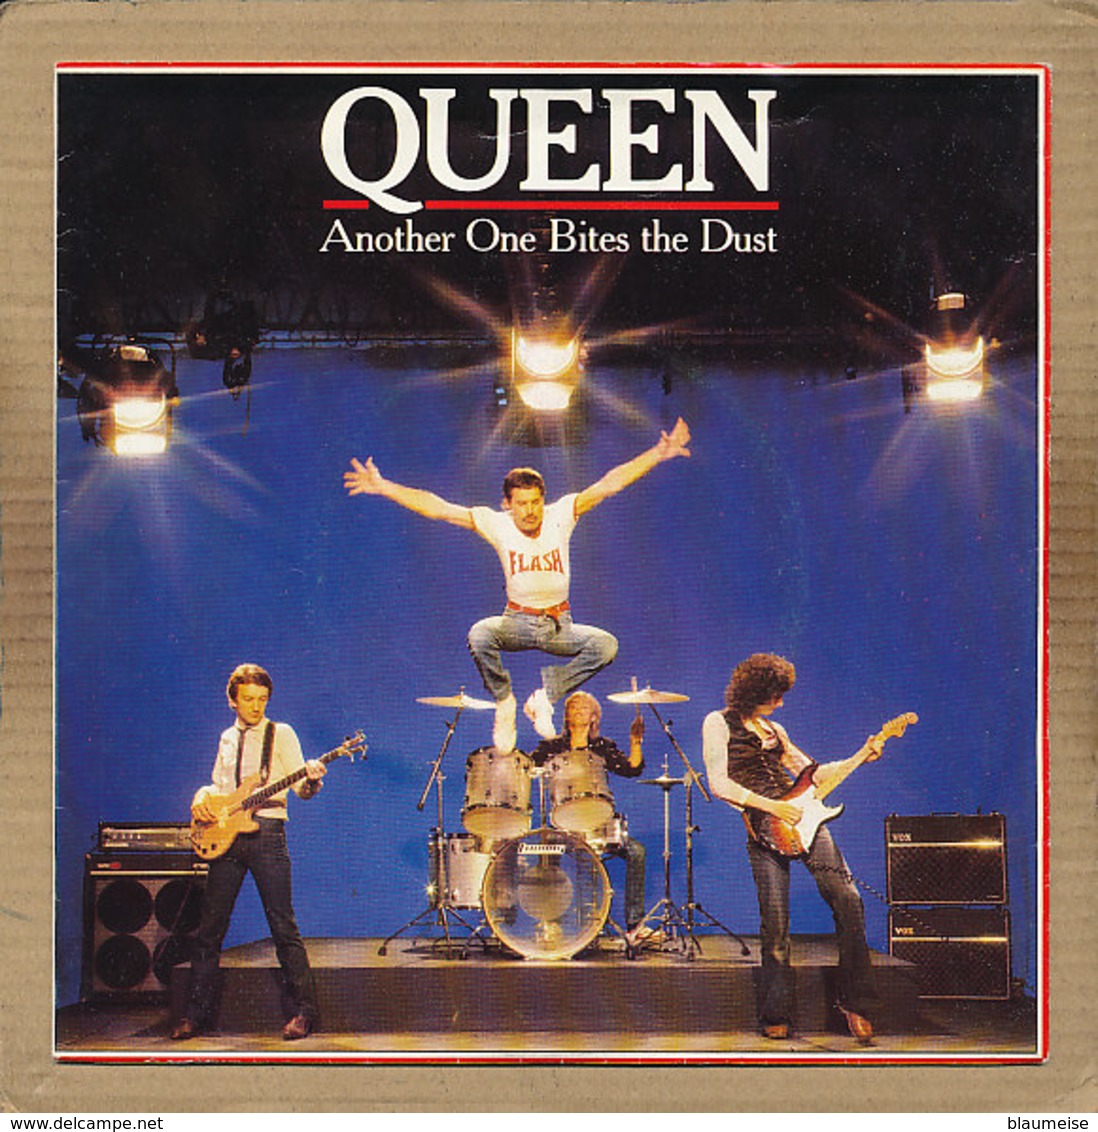 7" Single, Queen - Another One Bites The Dust - Disco, Pop